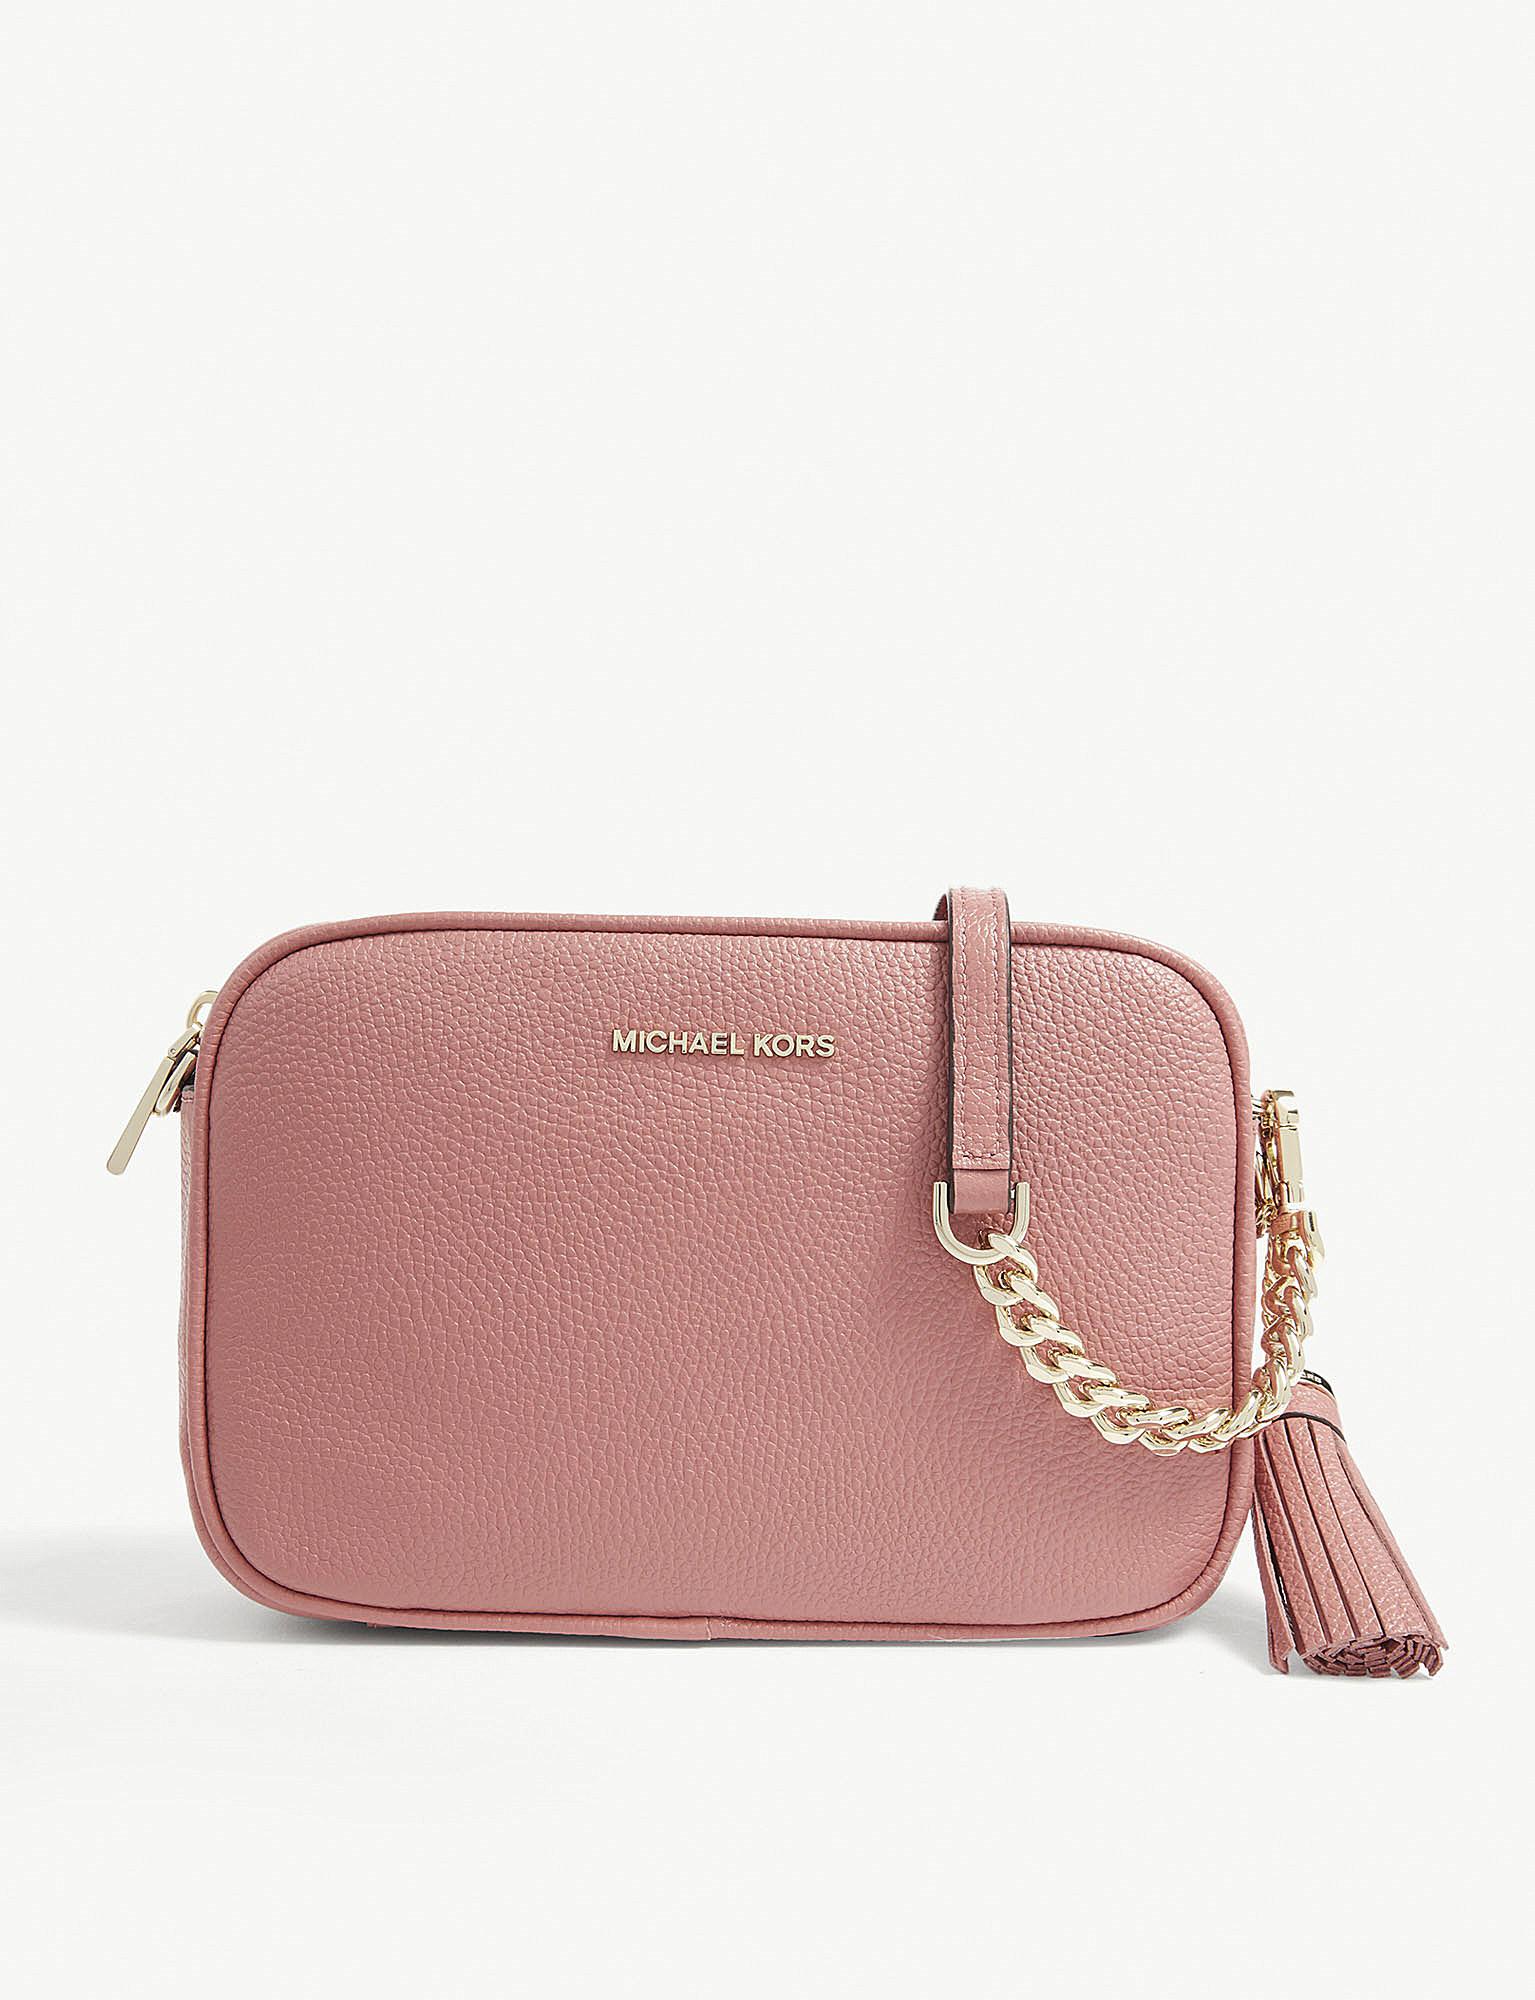 MICHAEL Michael Kors Ginny Leather Cross-body Bag in Rose (Pink) | Lyst